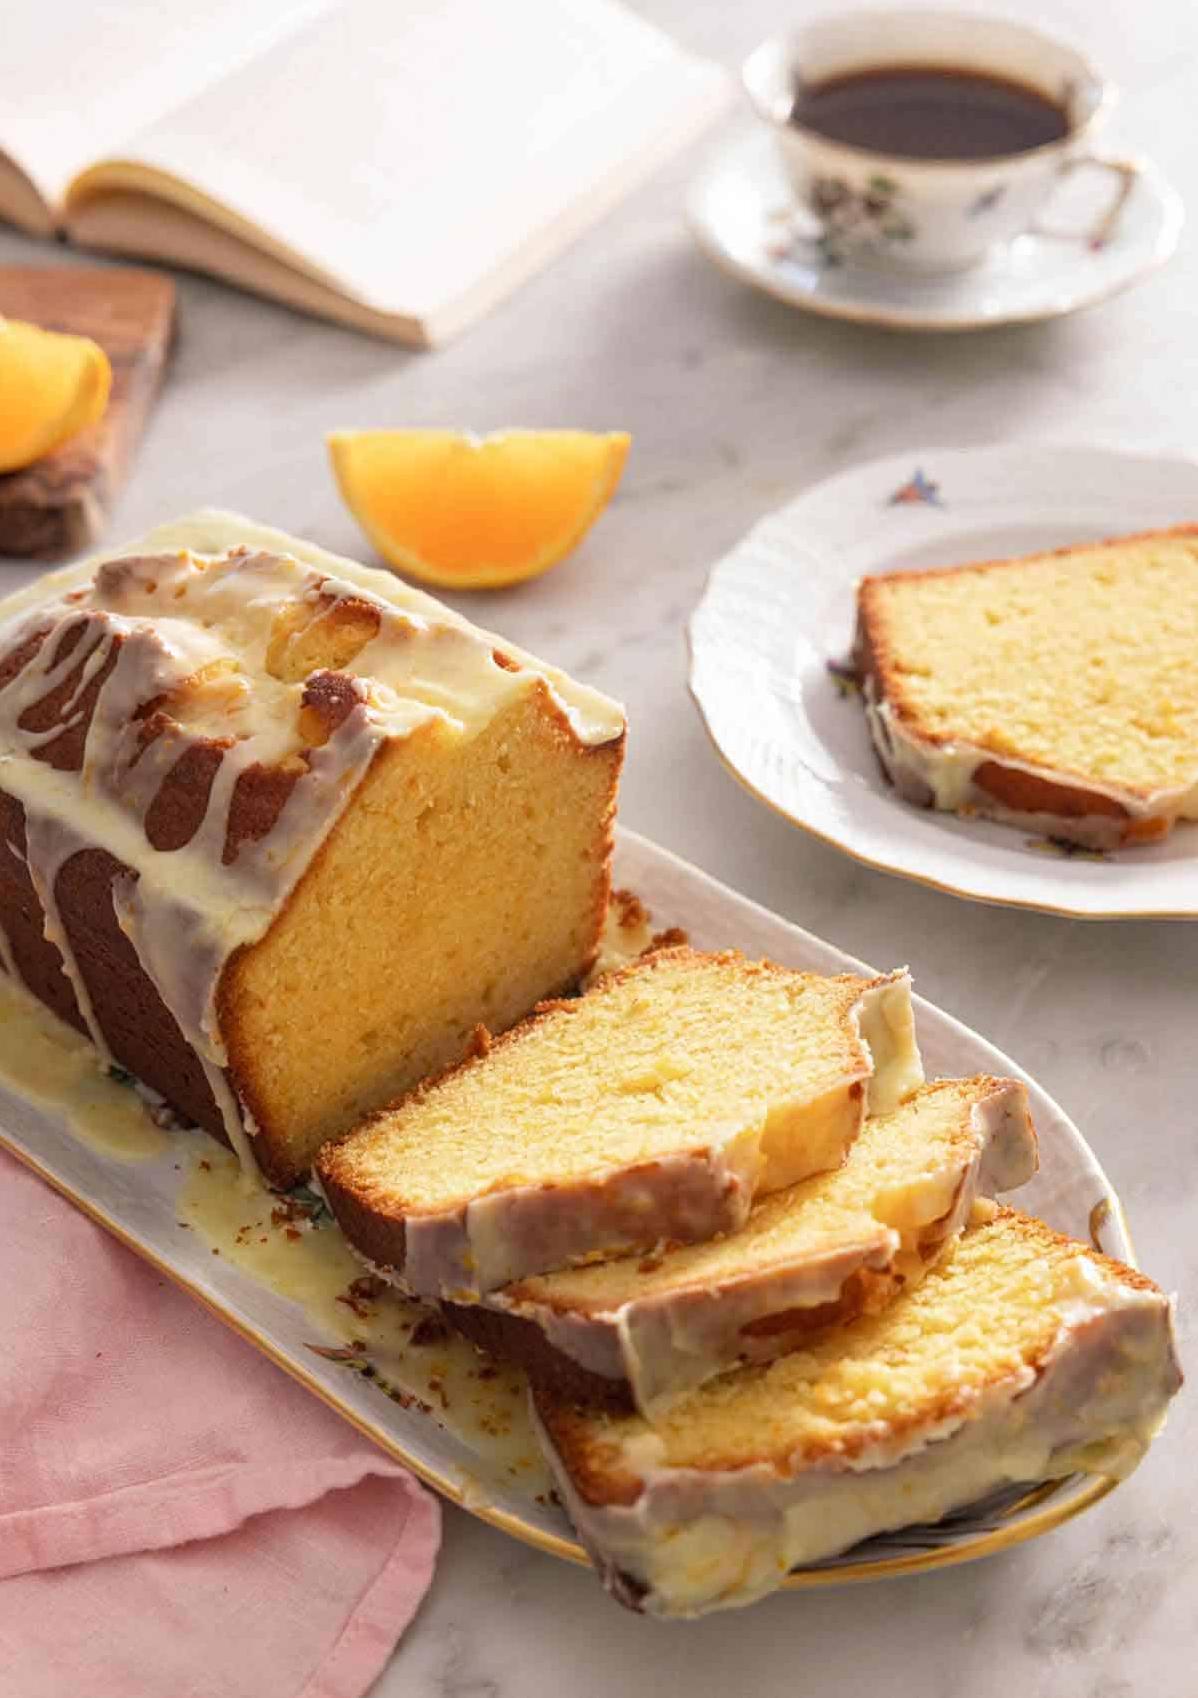  Freshly grated orange zest gives this coffee bread a zesty kick!